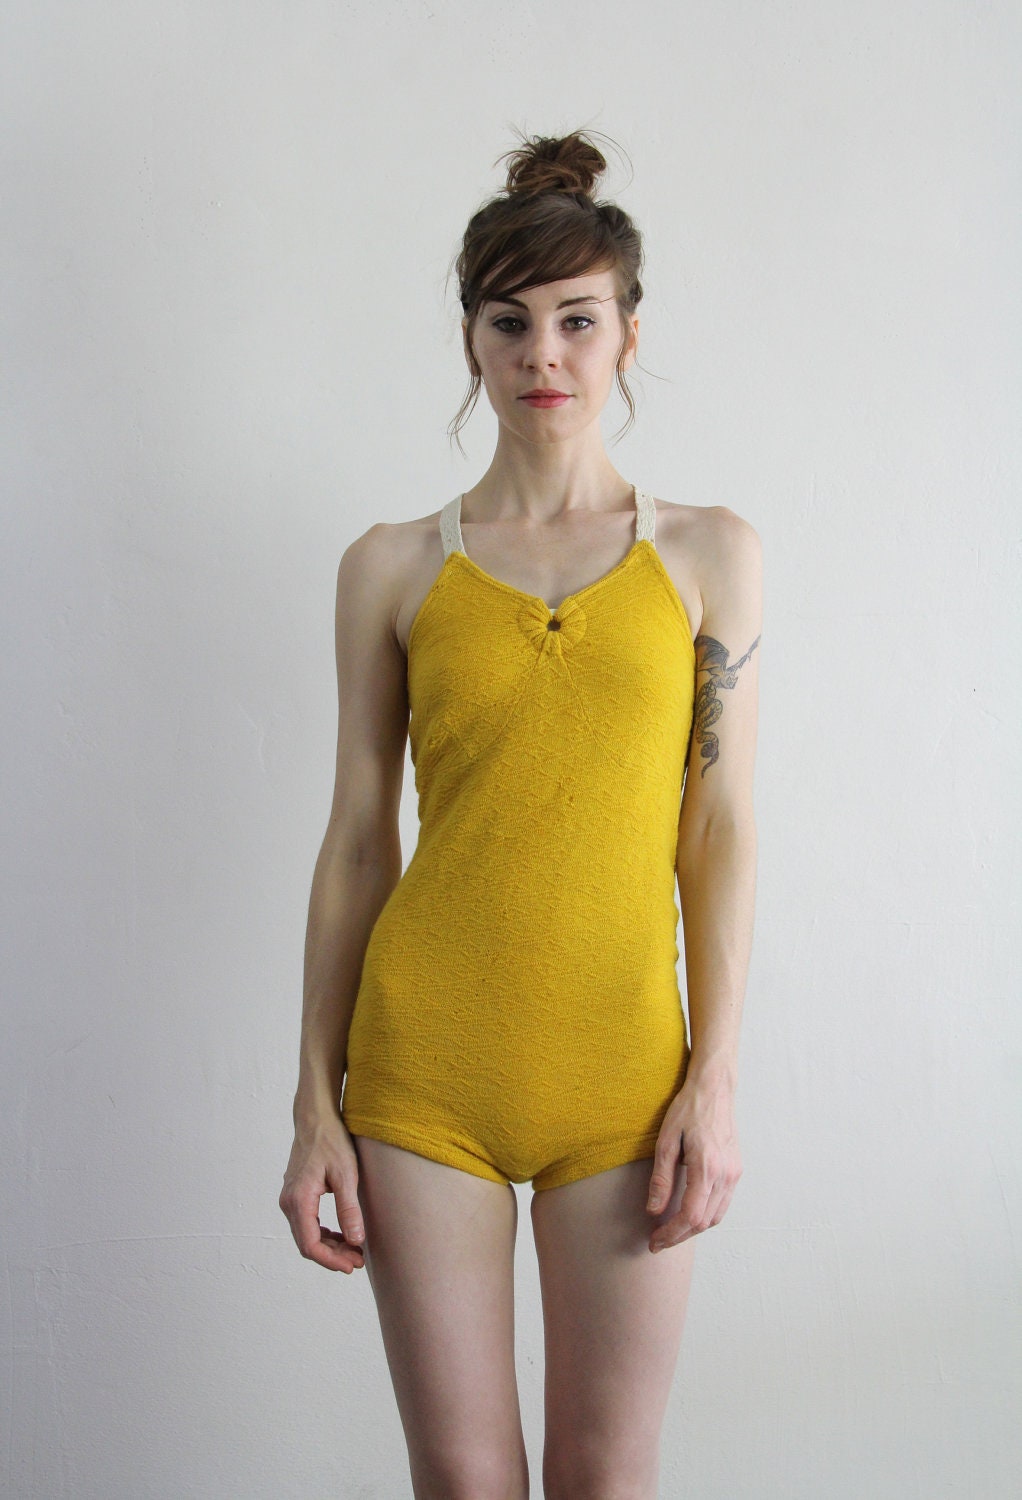 Vintage 40s Swimsuit Yellow White Bathing Suit 1940s Pin